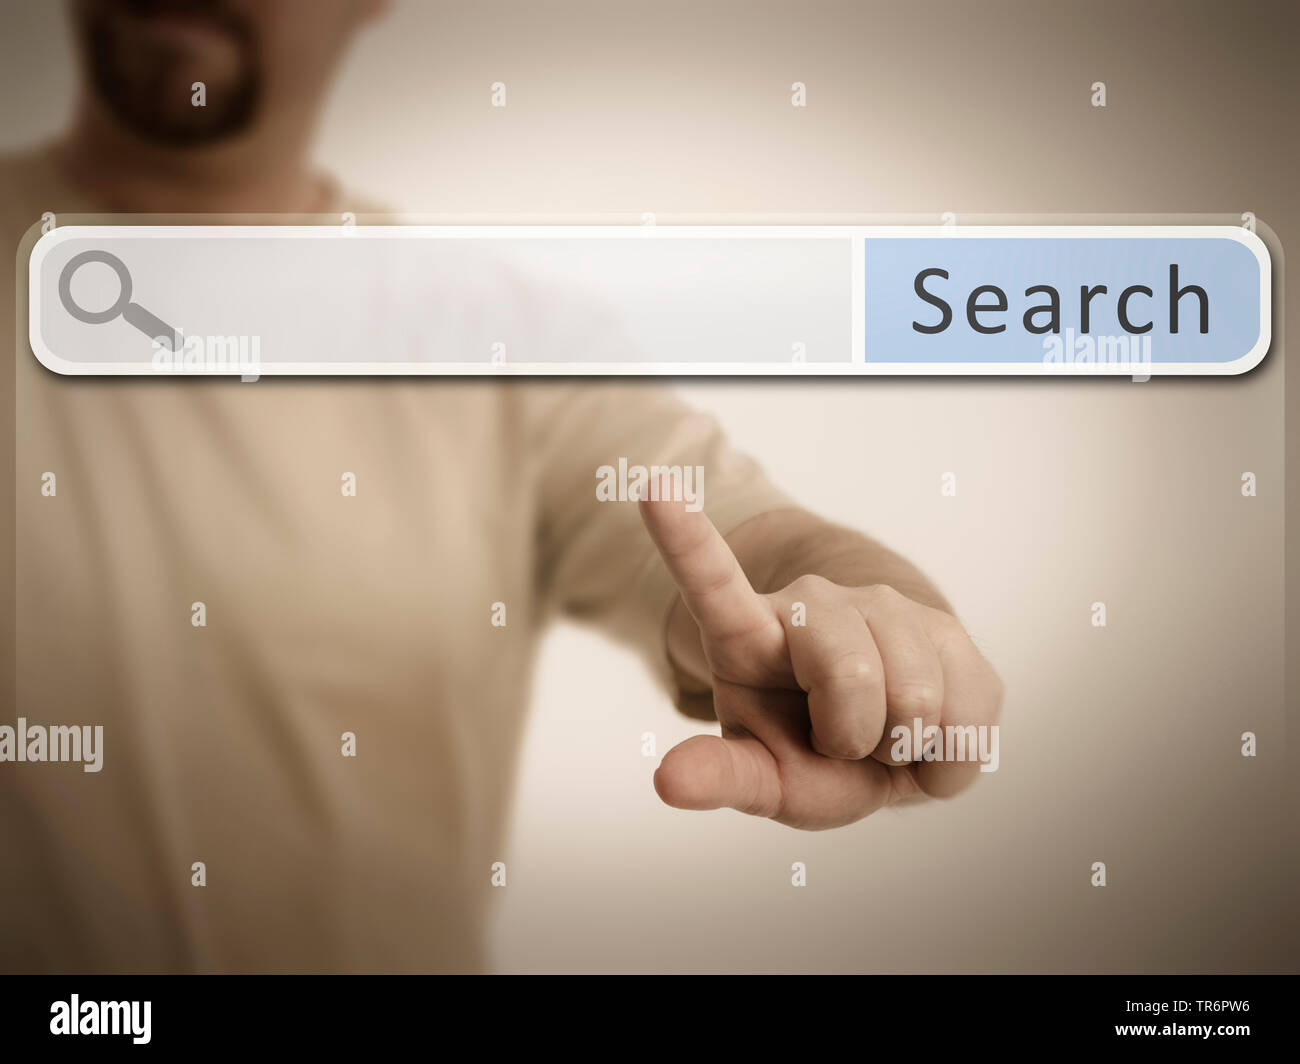 internet search with an empty search field Stock Photo